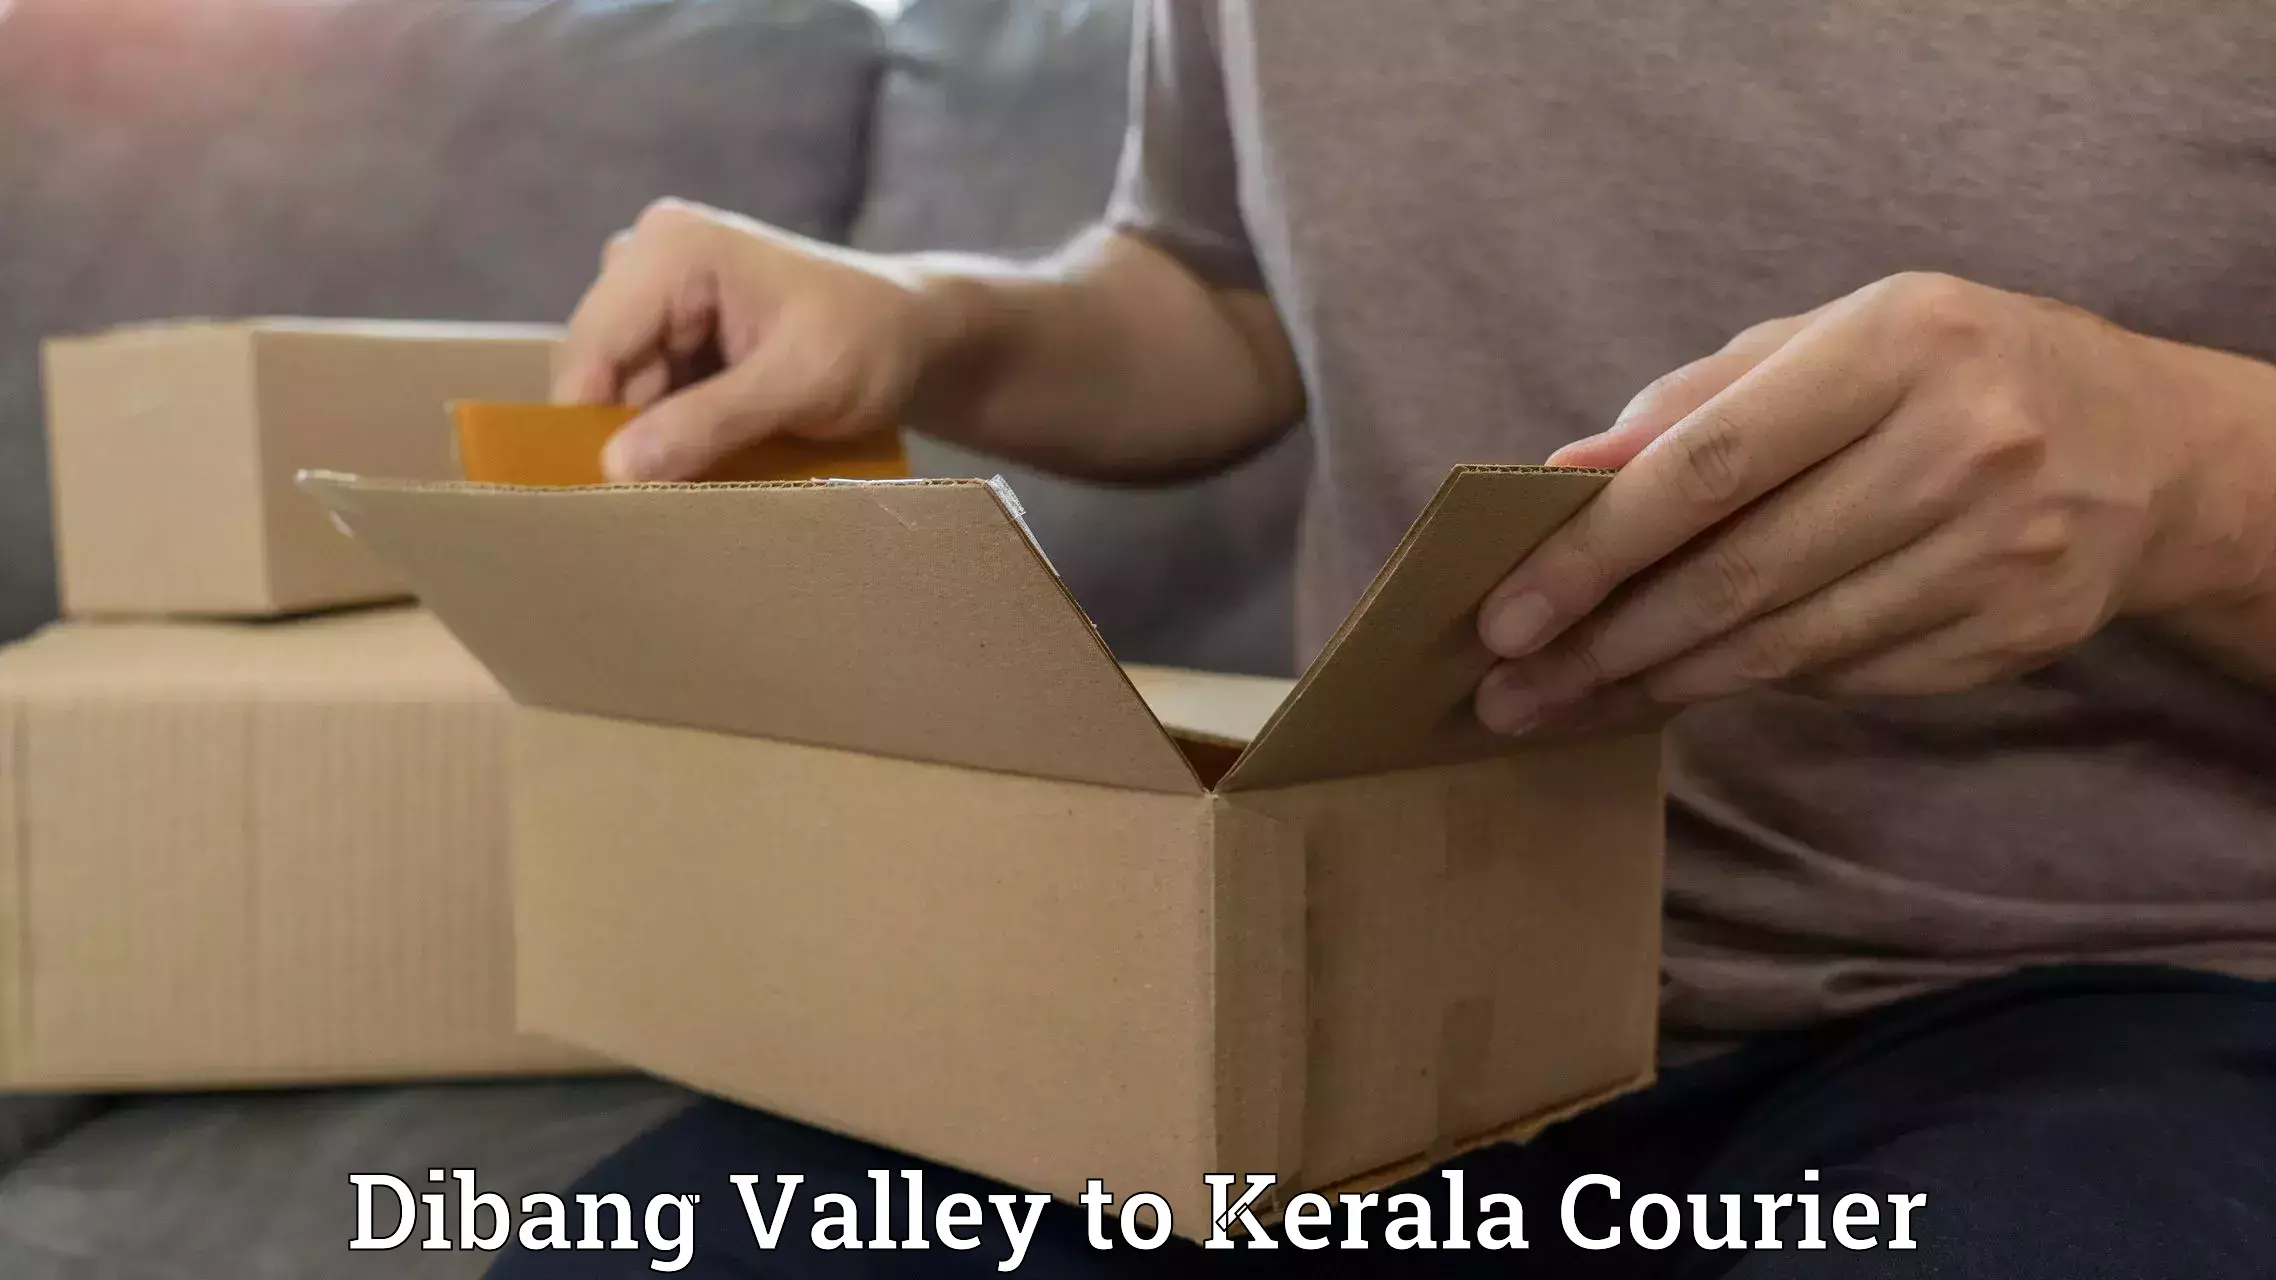 Courier app Dibang Valley to Cochin Port Kochi